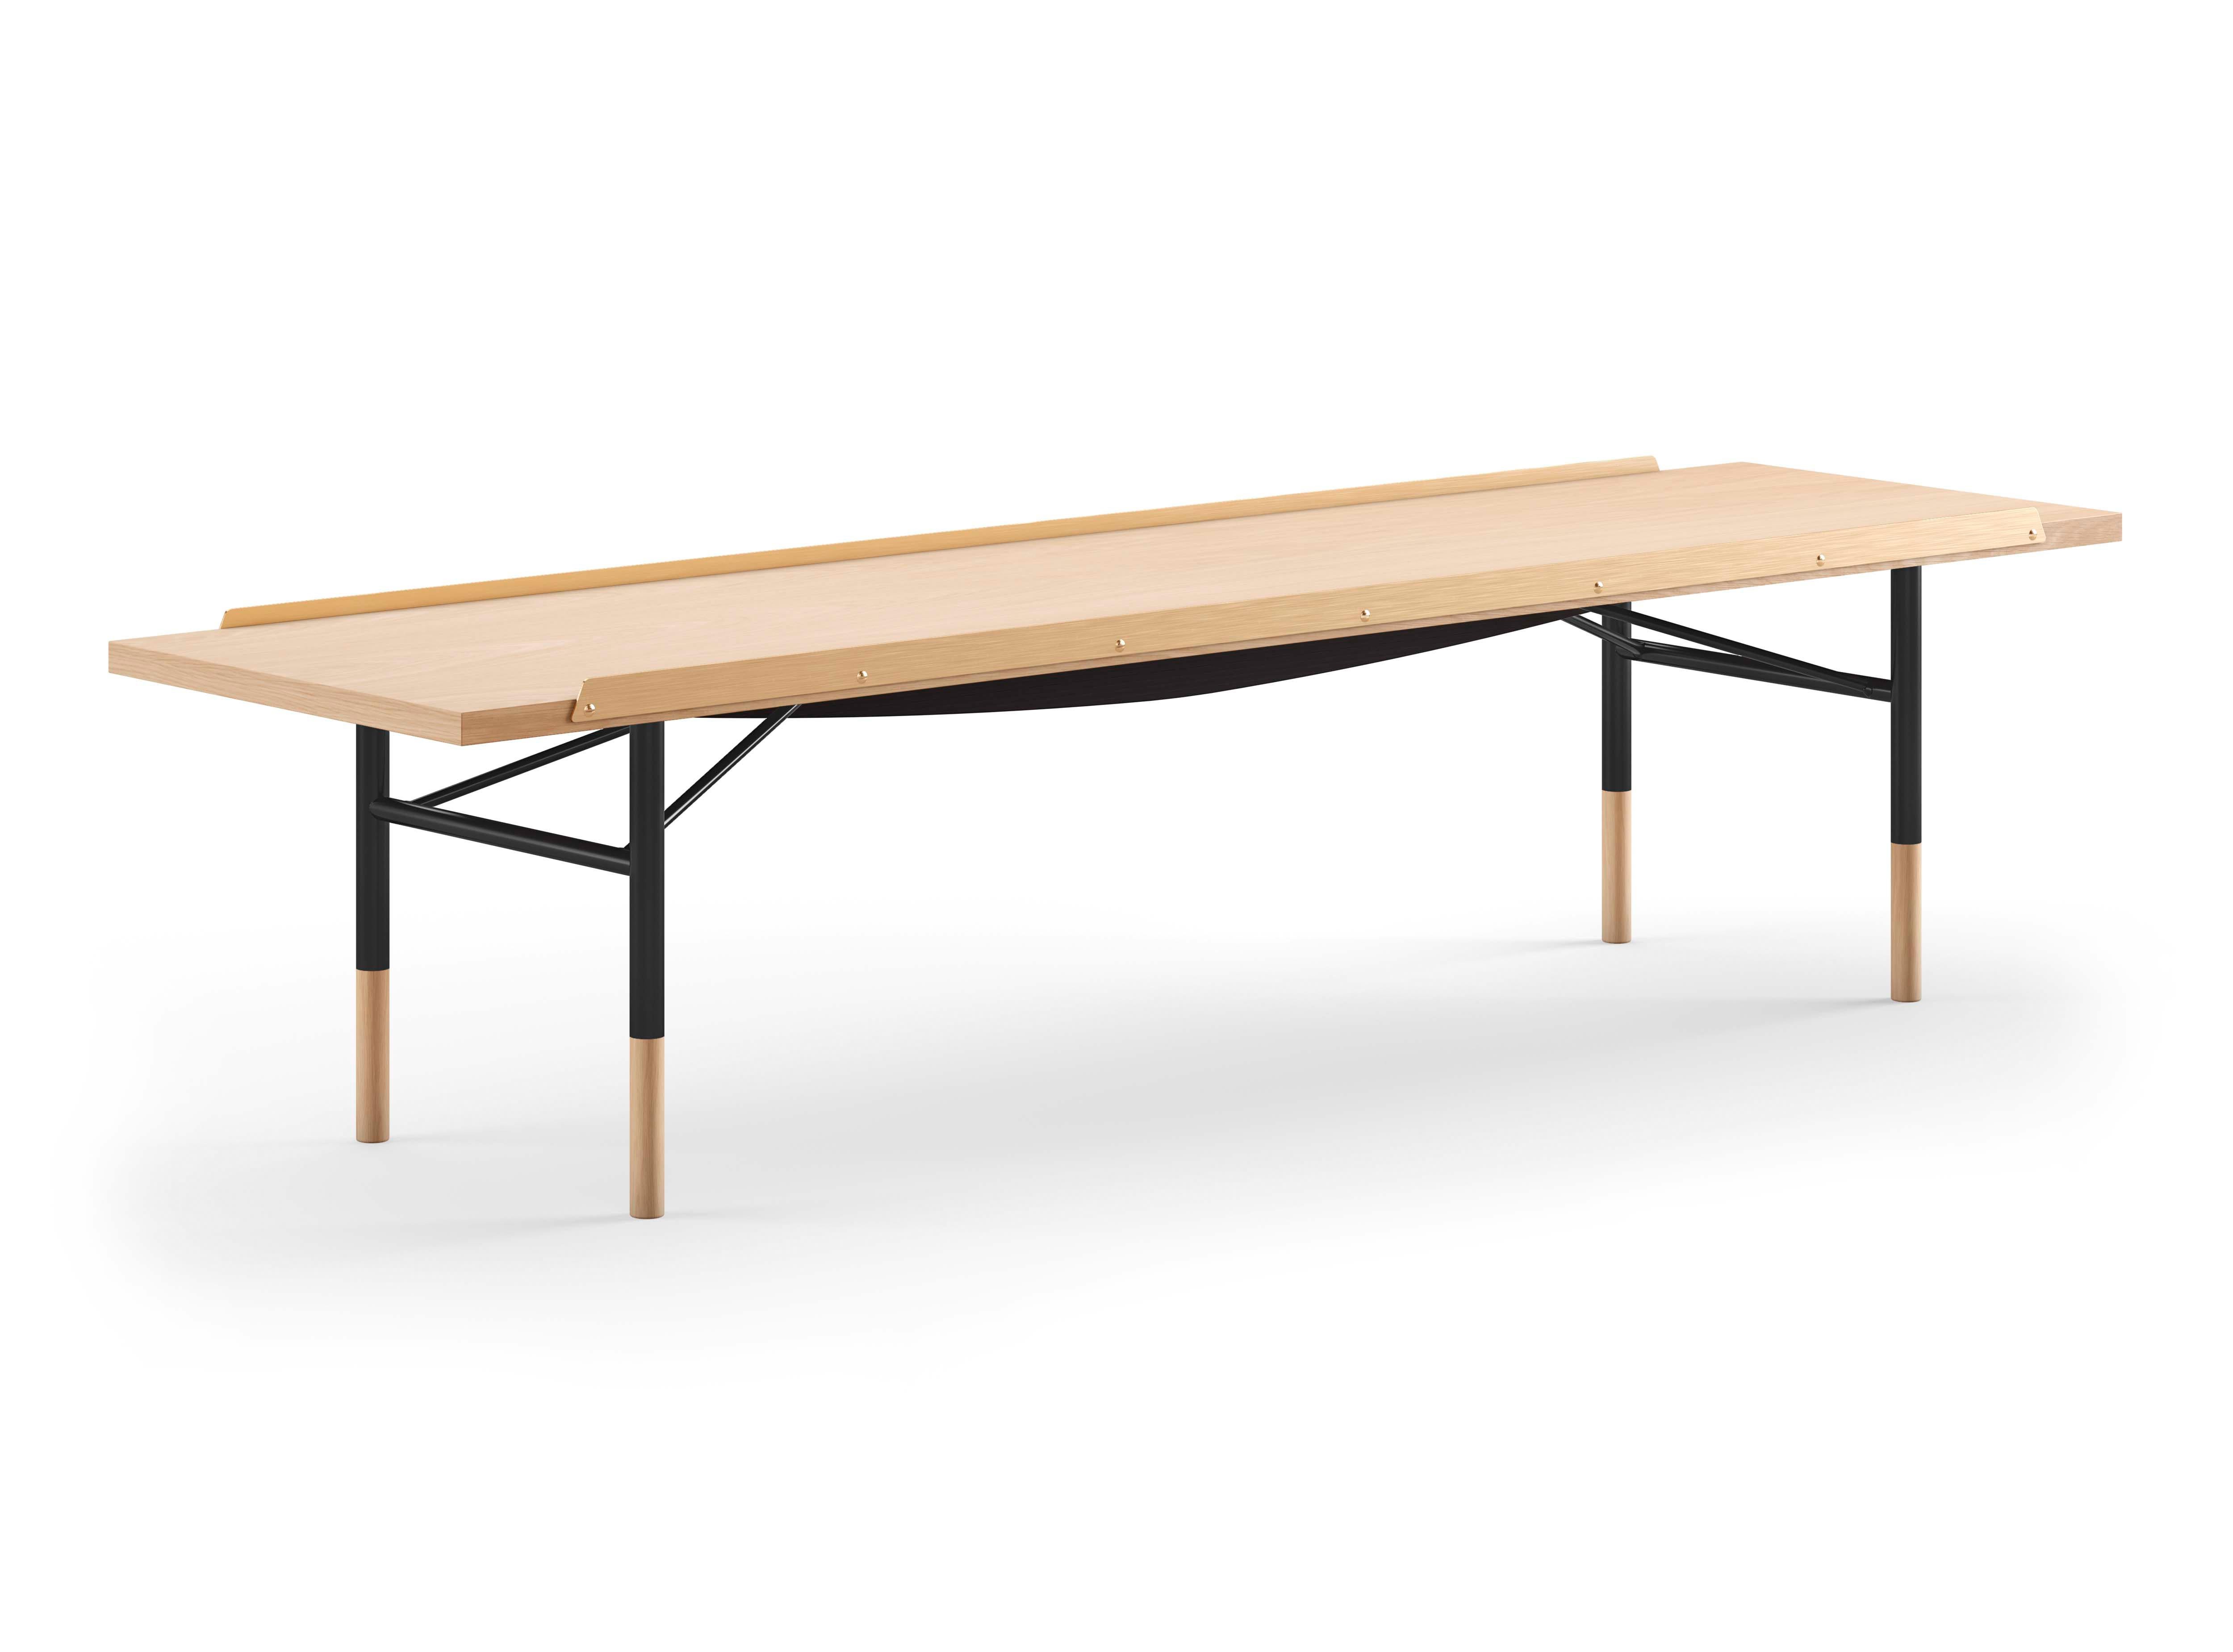 Table bench designed by Finn Juhl in 1953, relaunched in 2012.
Manufactured by House of Finn Juhl in Denmark.

Finn Juhl experienced an international breakthrough in the USA during the early 1950s. He subsequently designed a range of furniture